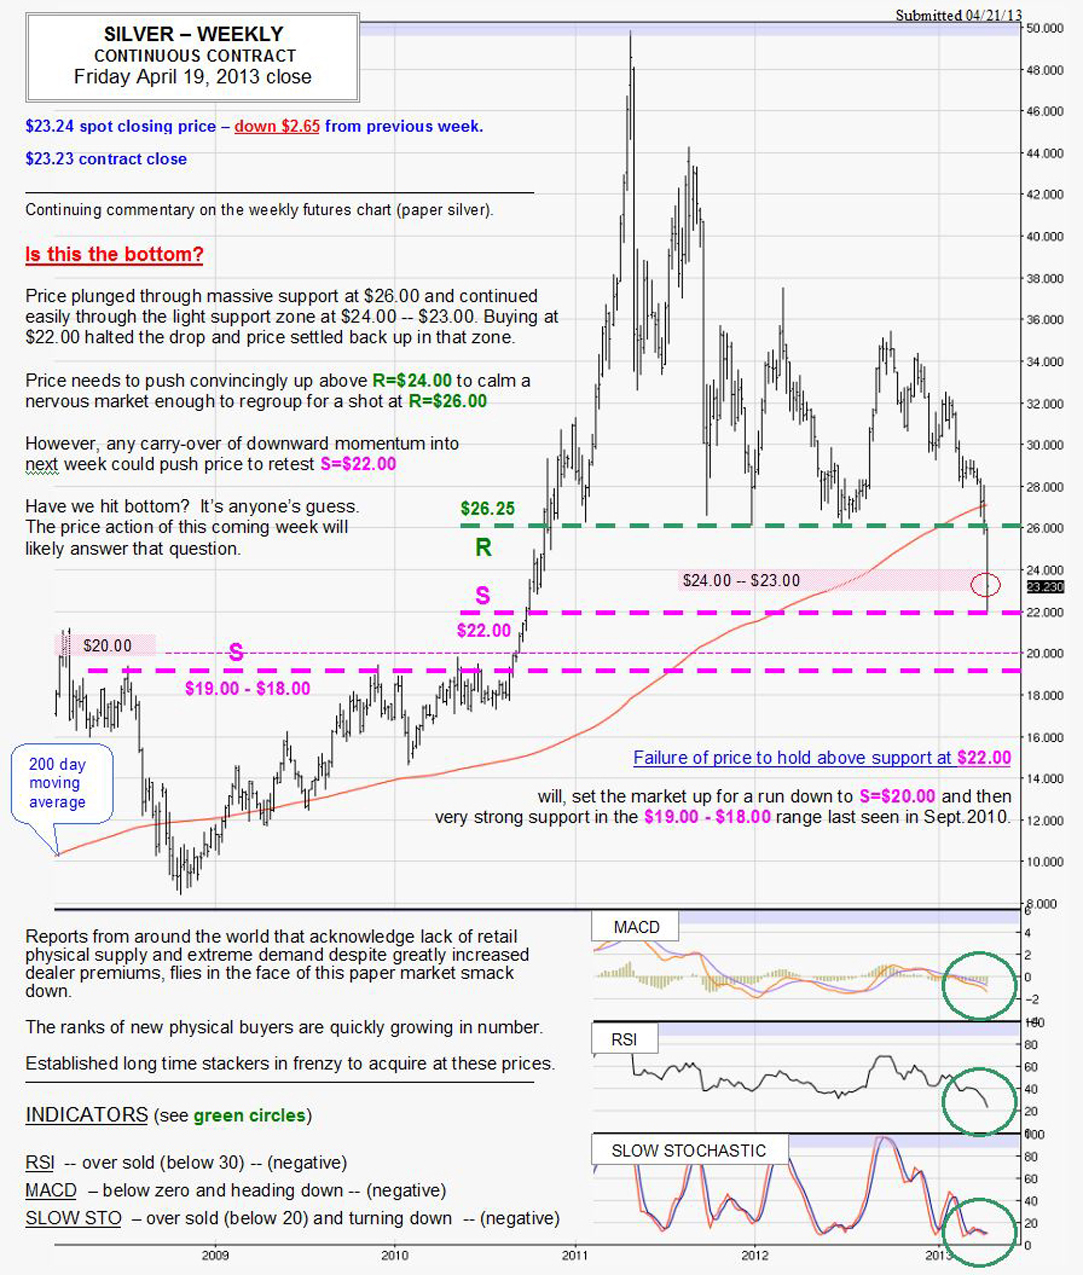 APRIL 19, 2013 chart & commentary